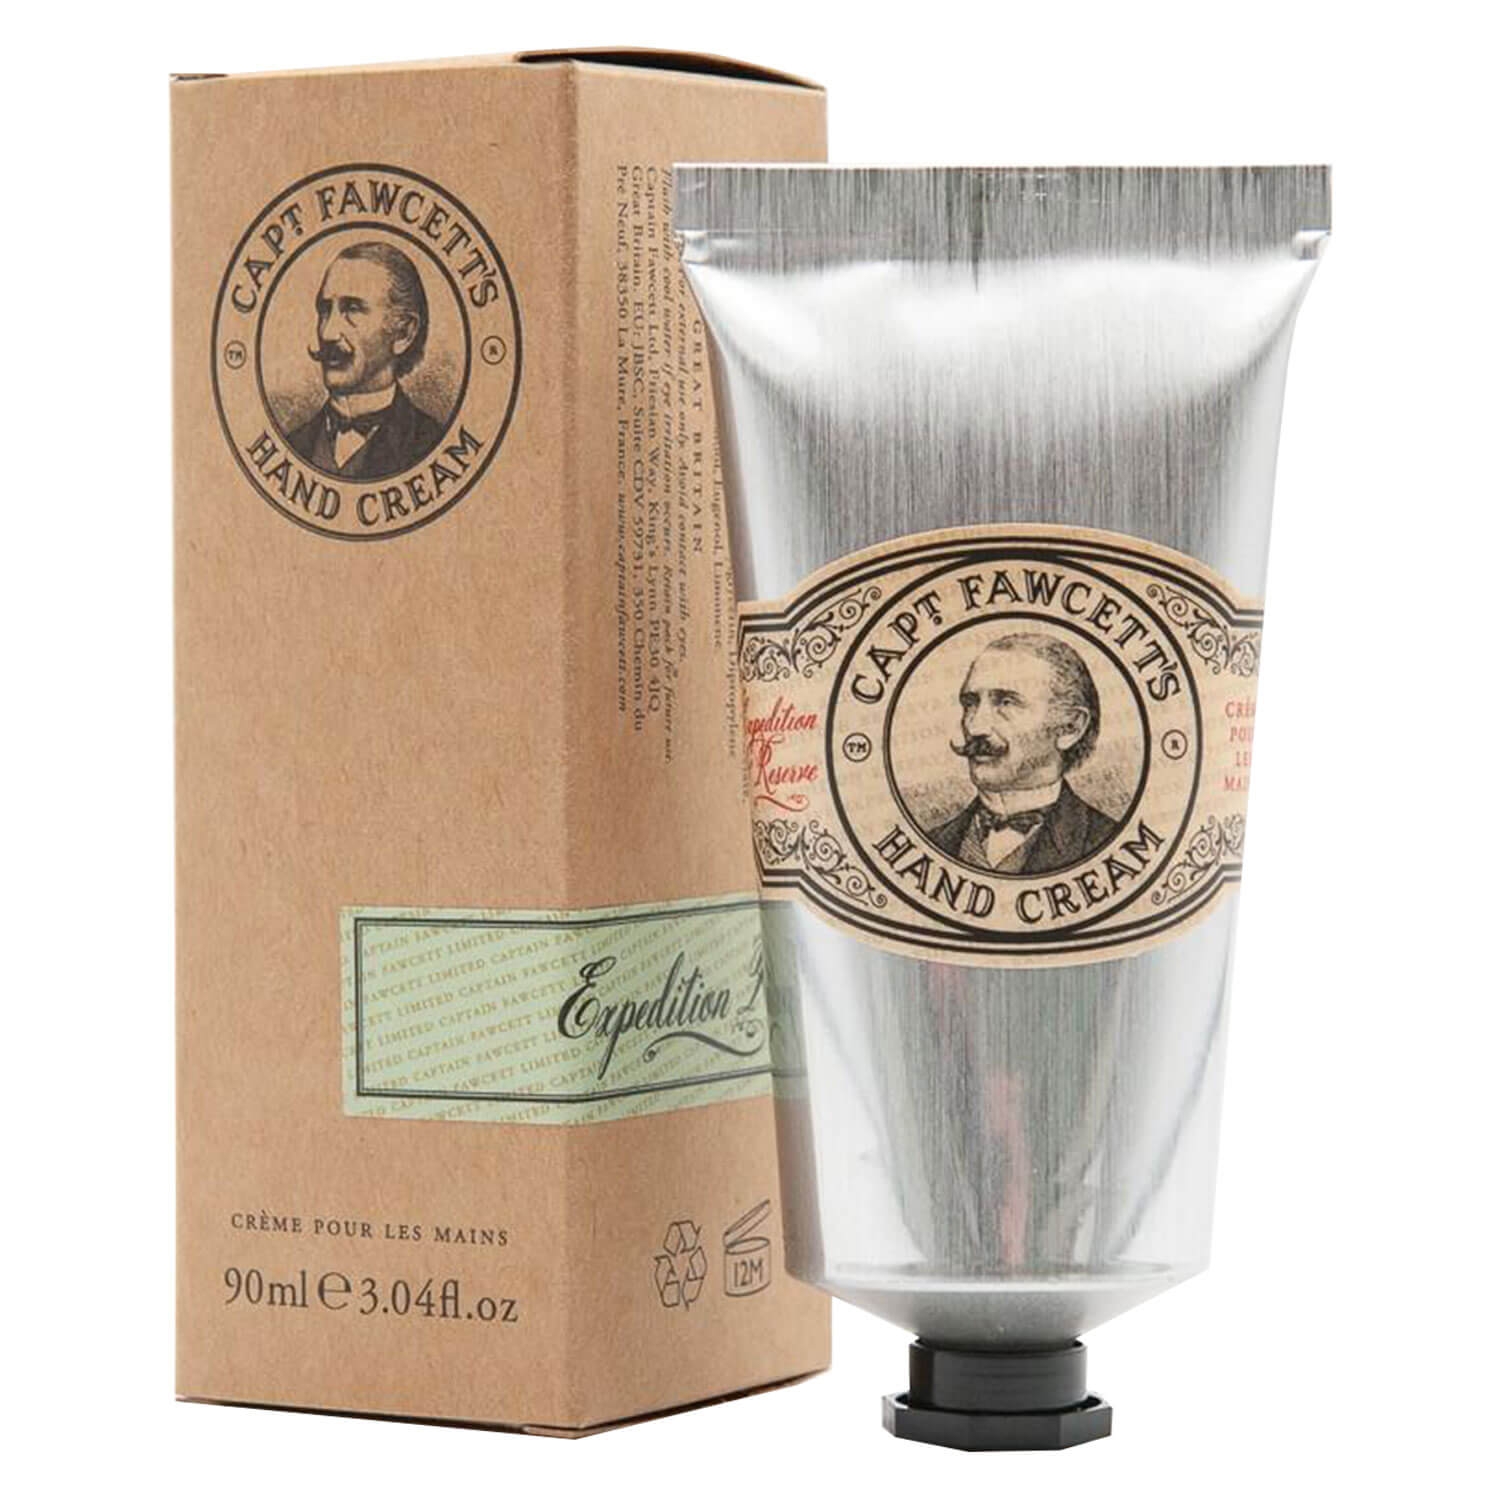 Product image from Capt. Fawcett Care - Expedition Reserve Hand Cream